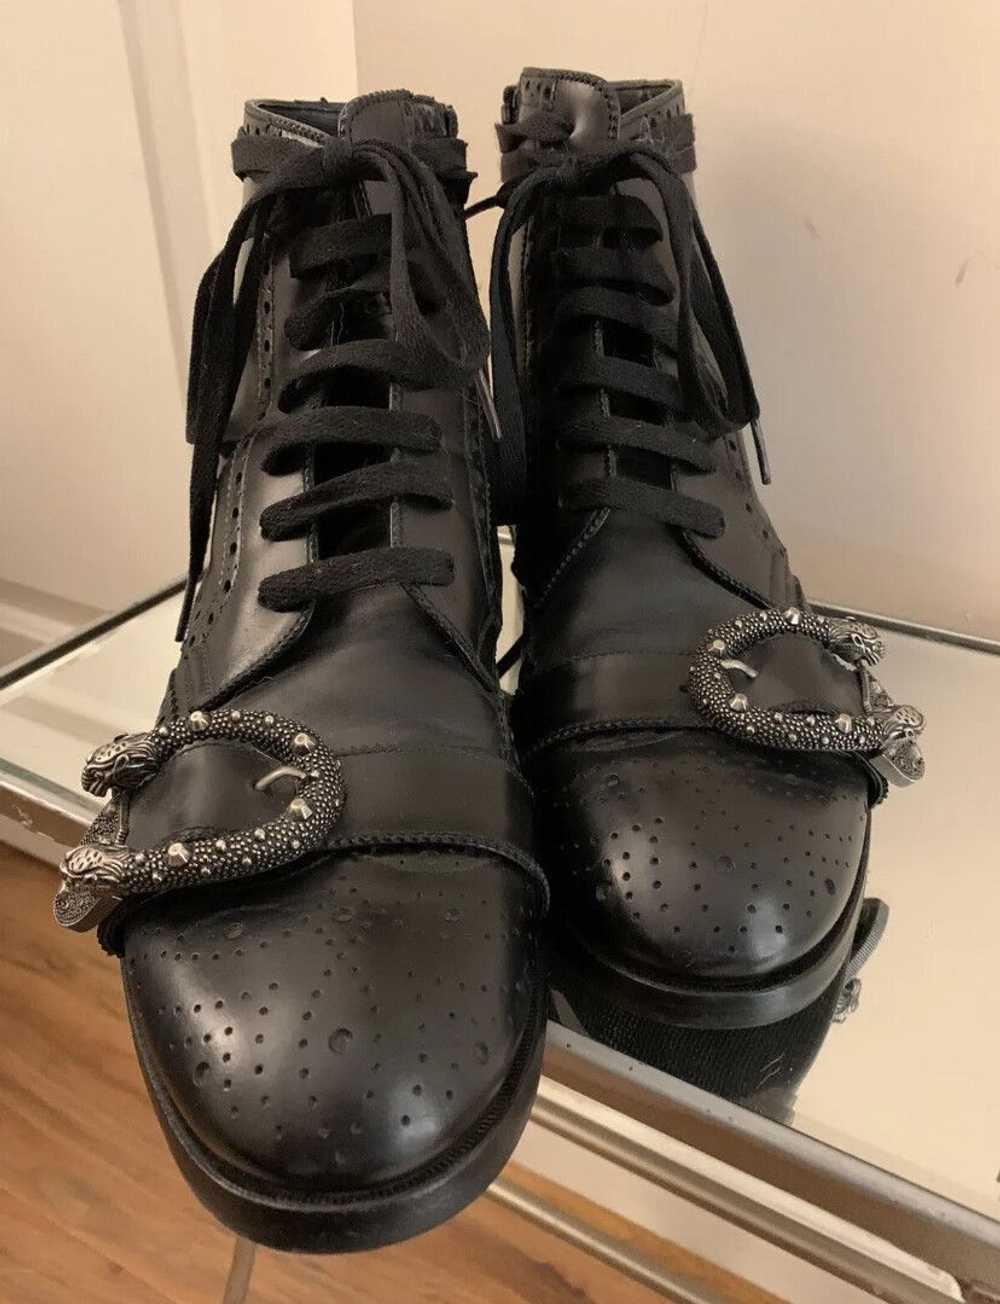 Gucci * $1500 Retail * Queercore Boots - image 2